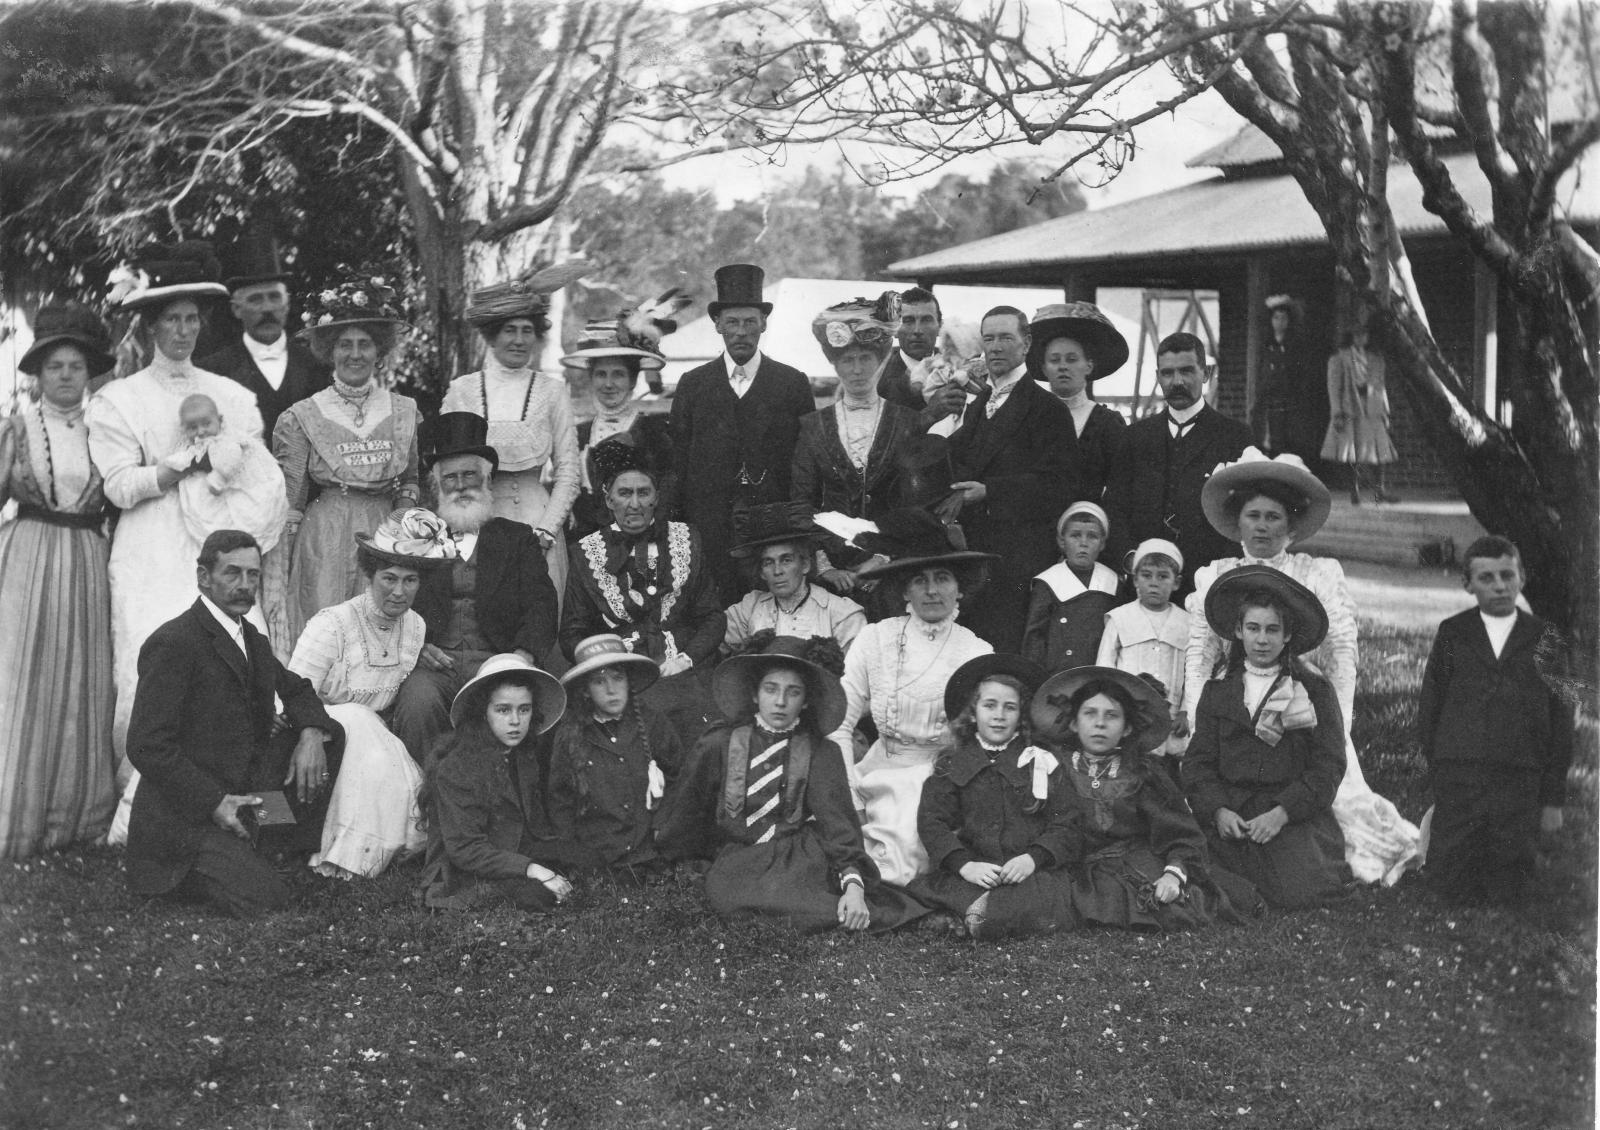 Clair Layman can be seen in the second row of this photo, taken at her parents Golden Wedding celebration at Wonnerup in 1909, wearing a white dress and black broad brimmed hat.